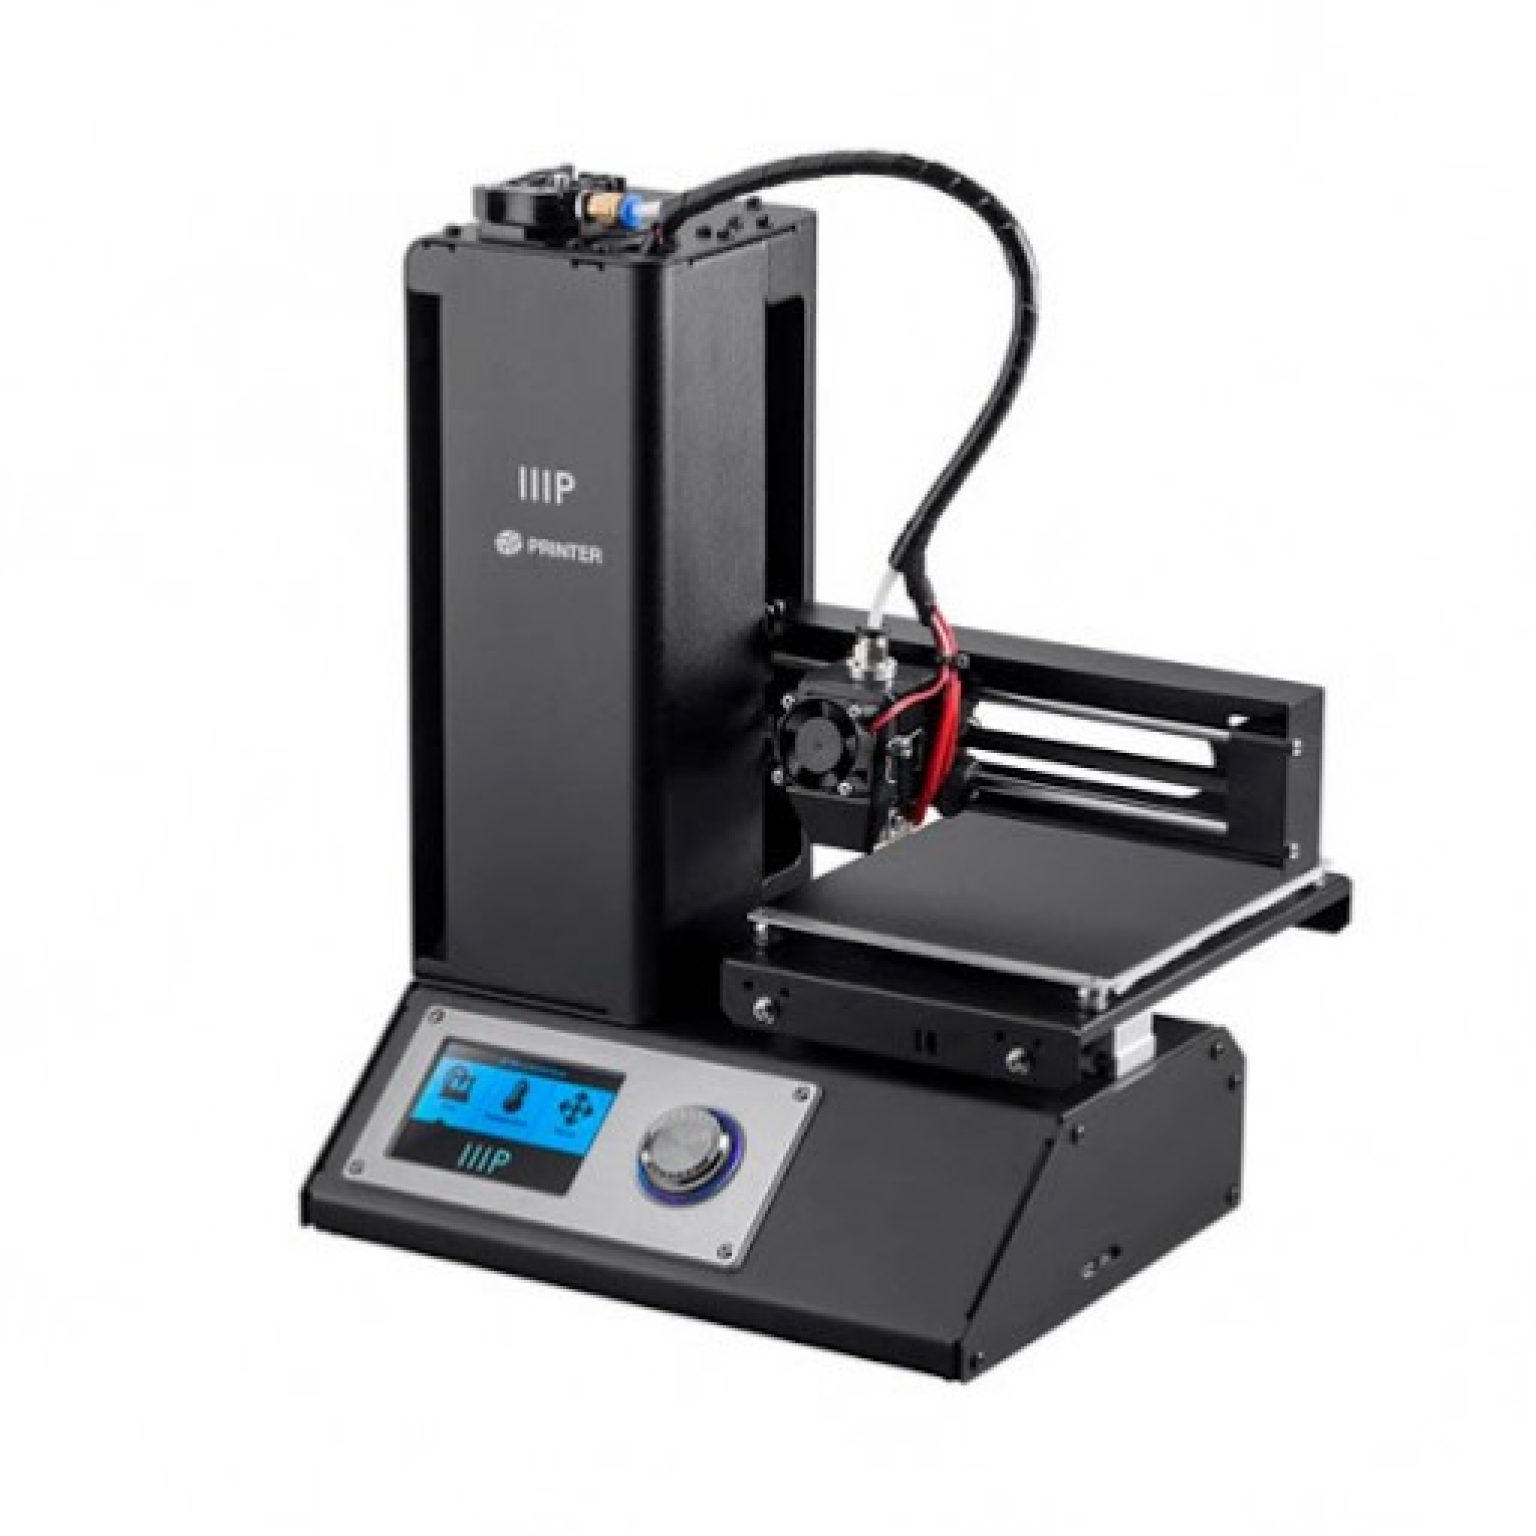 15 Best High Resolution 3D Printers Buying Guide of 2021 - 3D Printer Monoprice MP Select Mini V2 Front 510x510 1 1536x1536